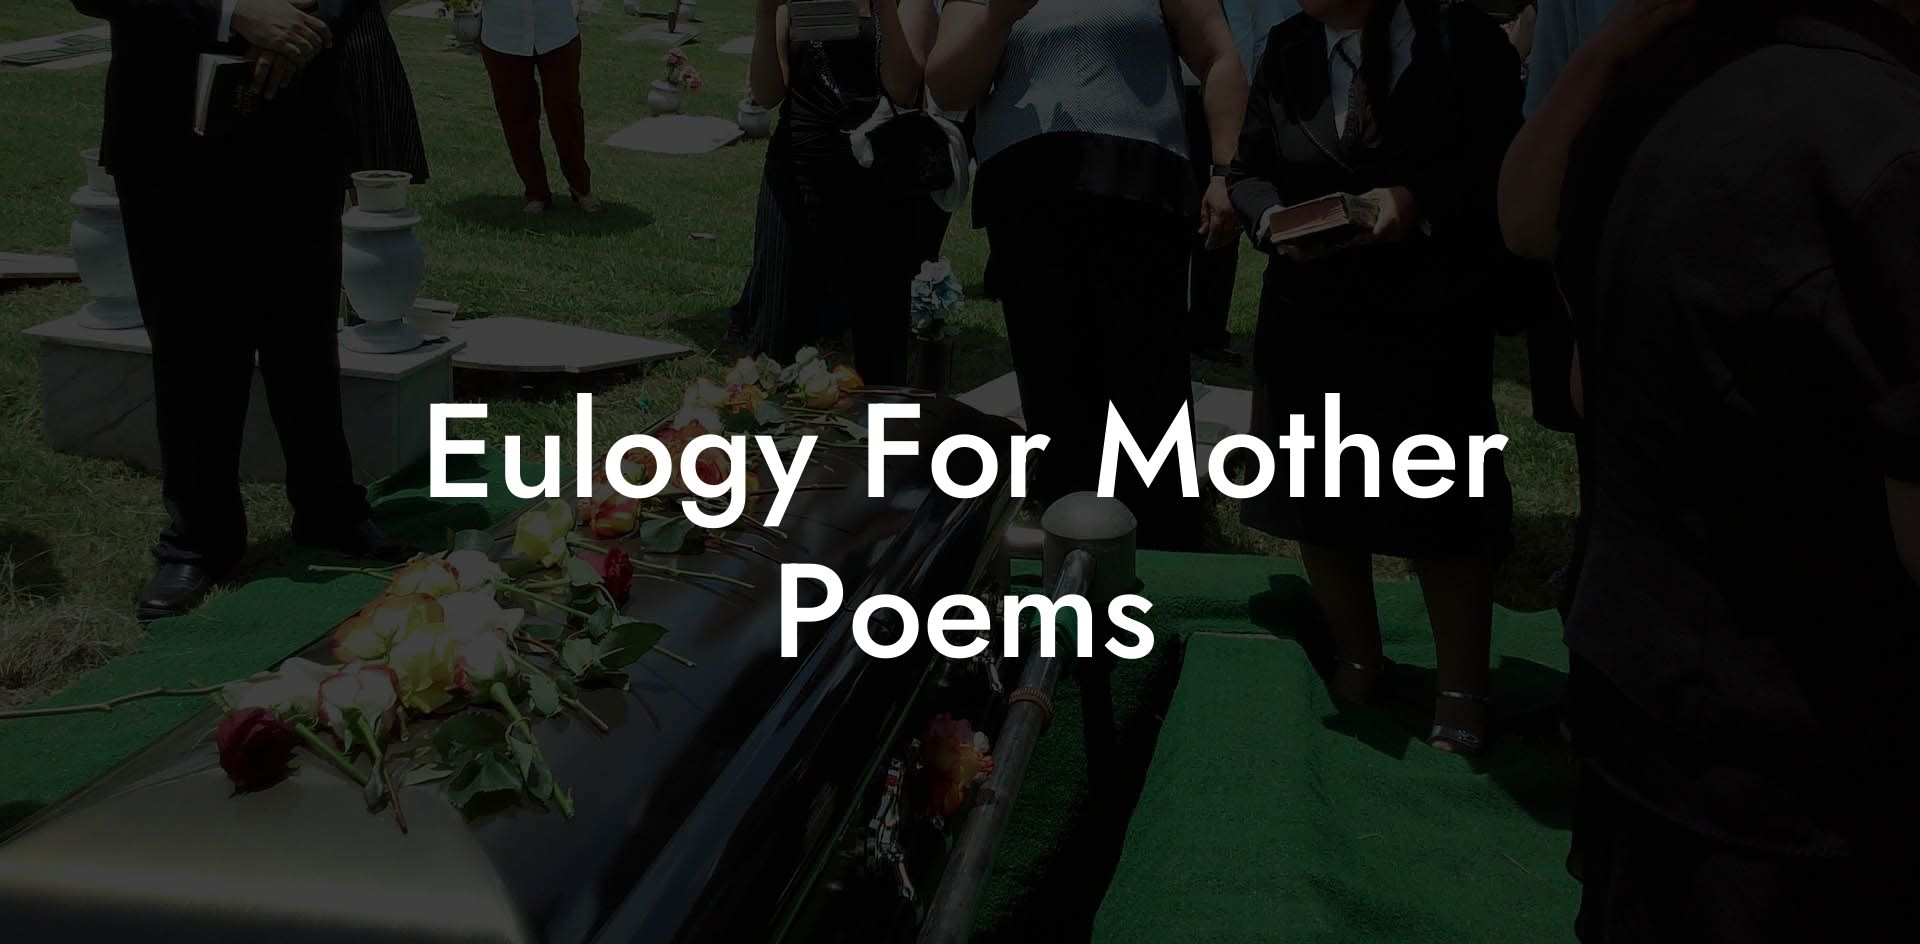 Eulogy For Mother Poems